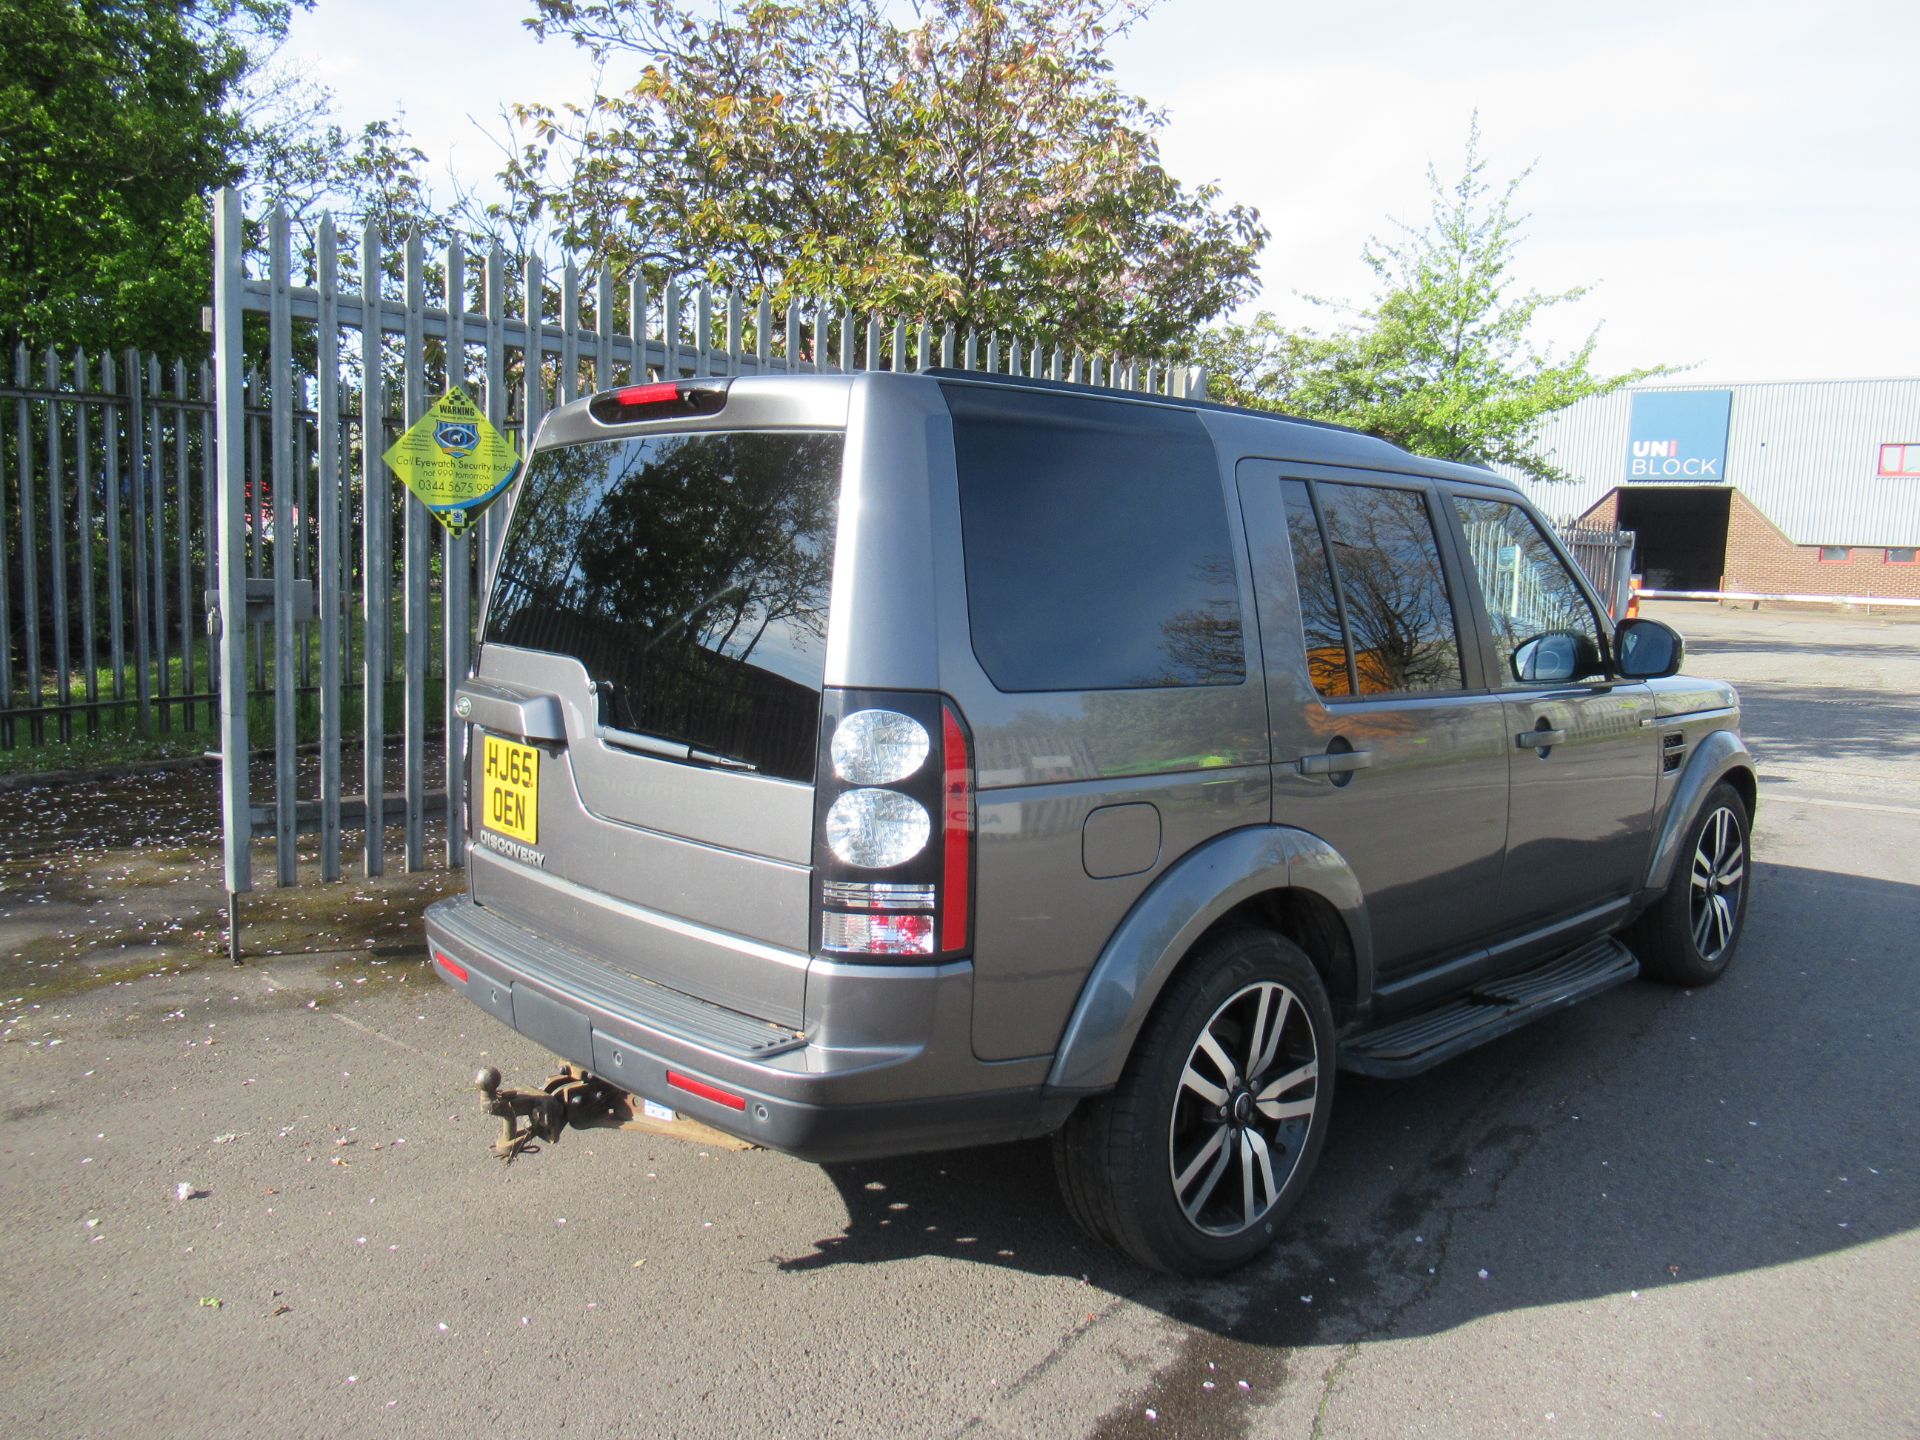 2015 GREY LAND ROVER DISCOVERY SE SDV6 AUTO - Image 6 of 32